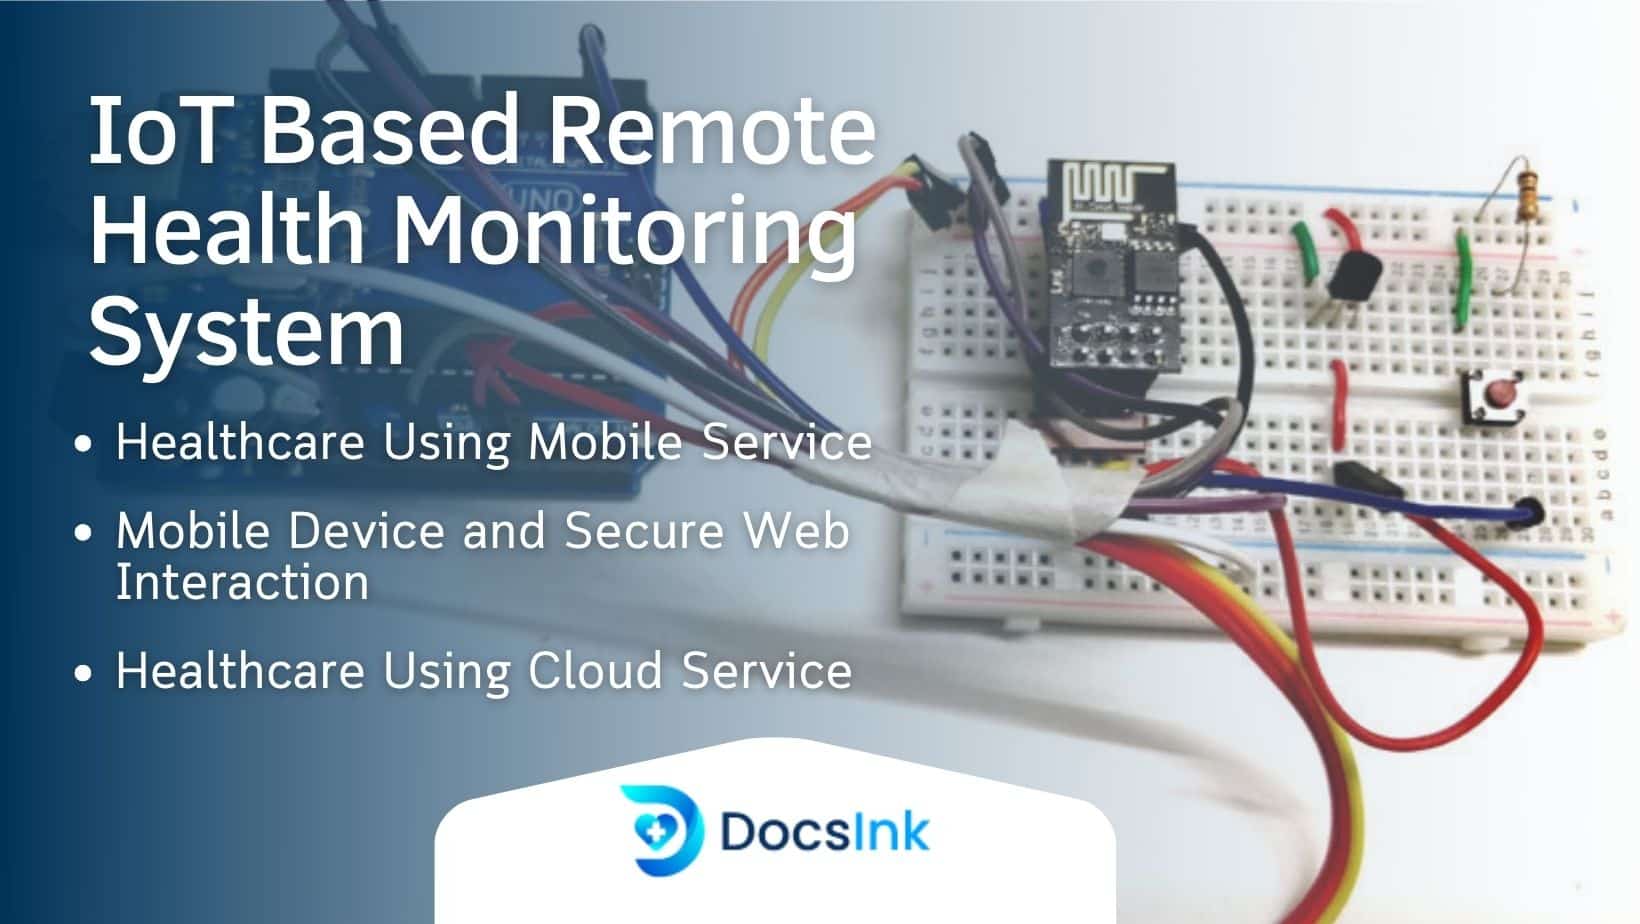 IoT-based Remote Health Monitoring Systems